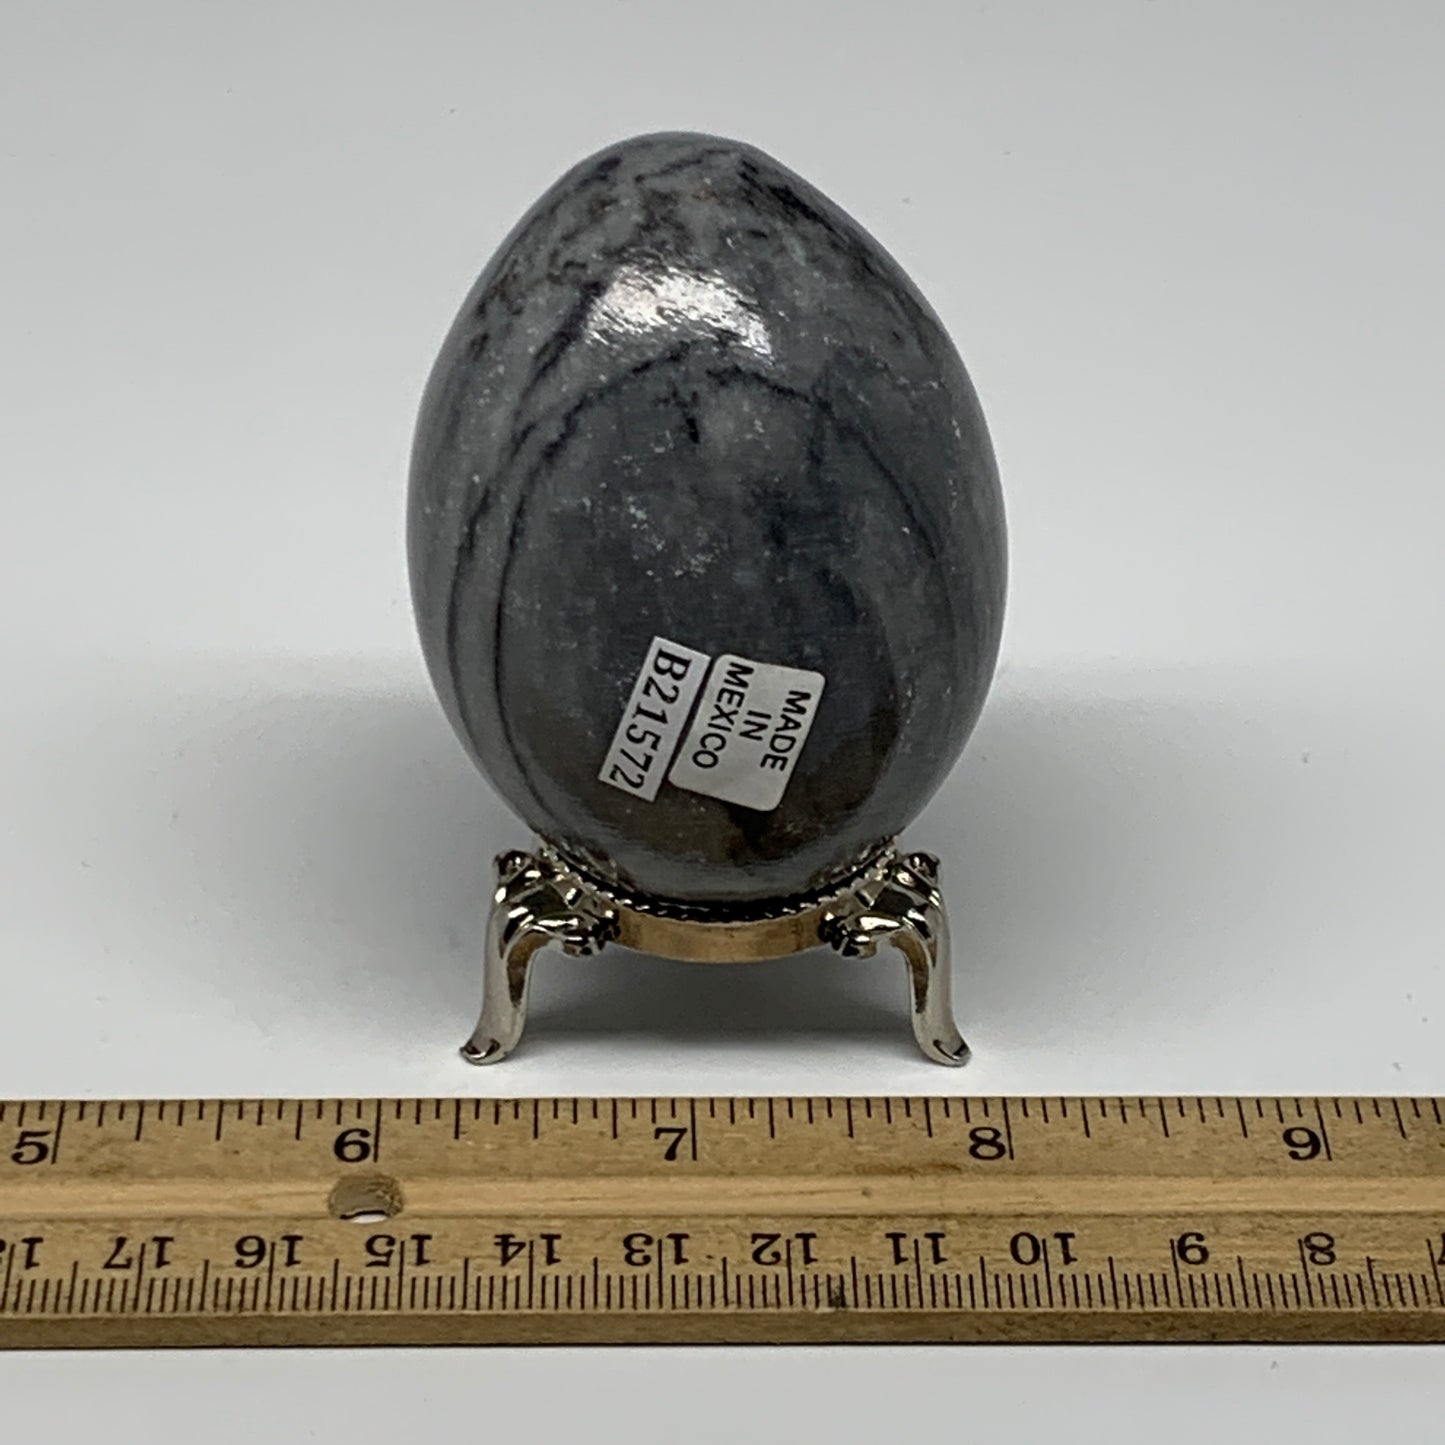 209.9g, 2.6"x1.9" Natural Gray Onyx Egg Gemstone Mineral, from Mexico, B21572